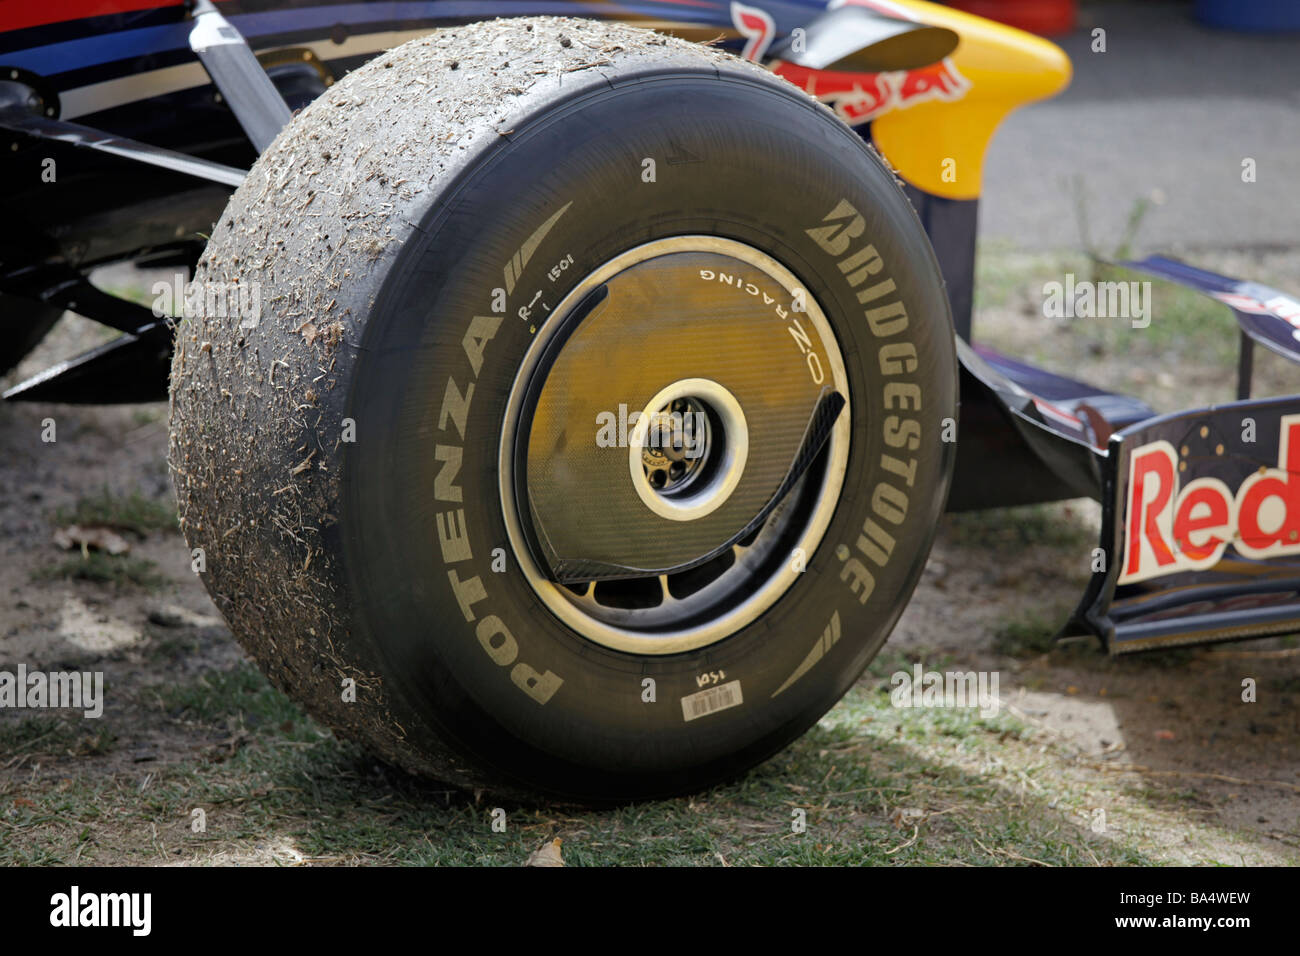 The Red Bull car driven and abandoned by Sebastian Vettel in the first  practice session at the 2009 Australian Grand Prix Stock Photo - Alamy